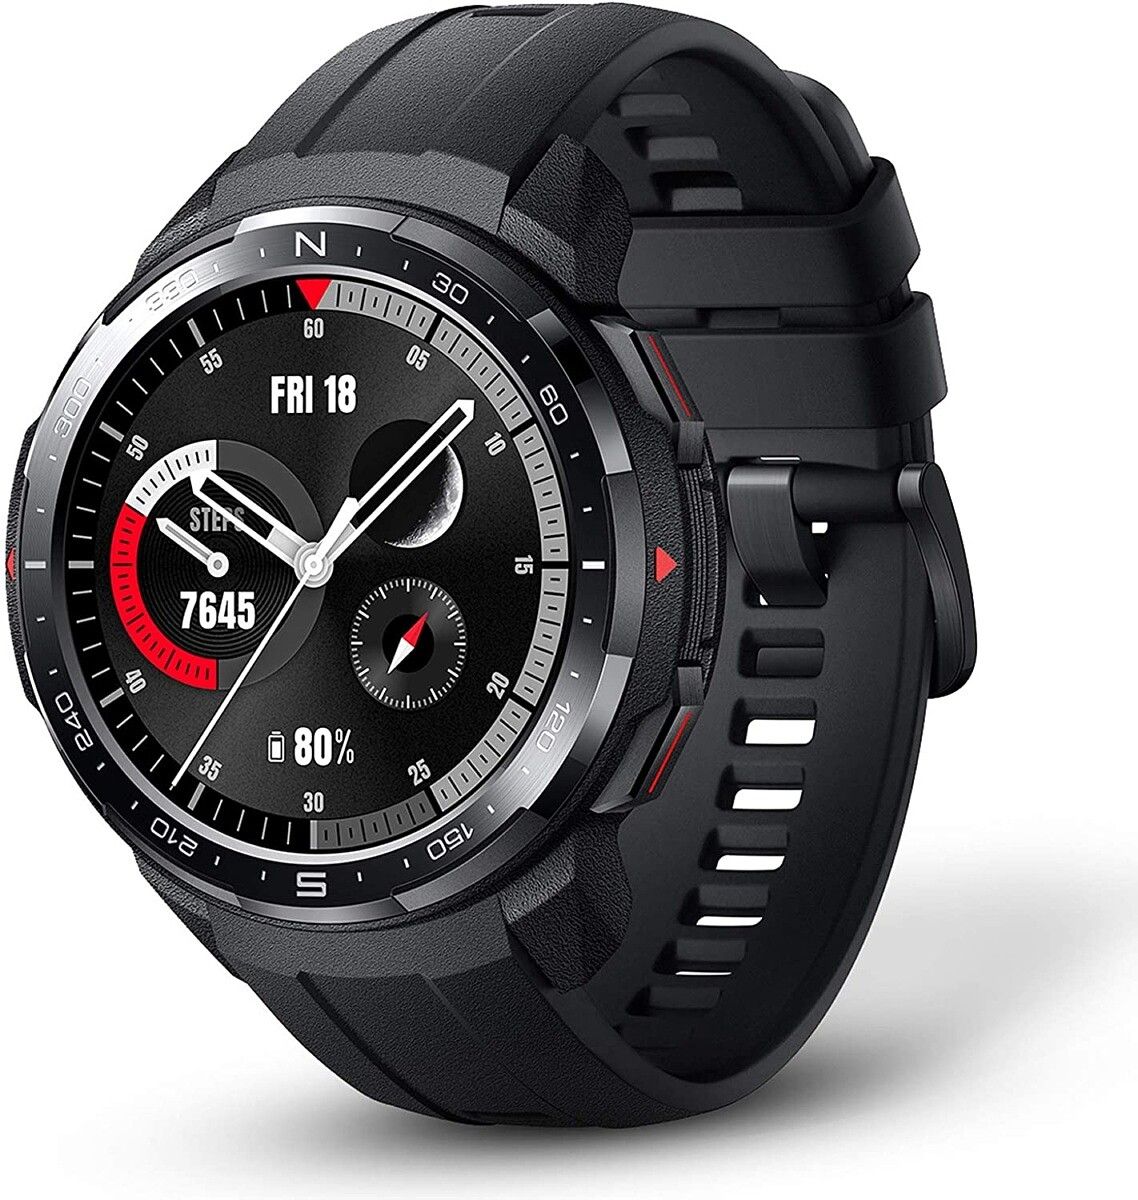 With GPS tracking, workout modes, and up to 25 days of battery life, this is the smartwatch for the adventurer in your life. Use the voucher on the store page to save £50 and bring the GS Pro down to £199!